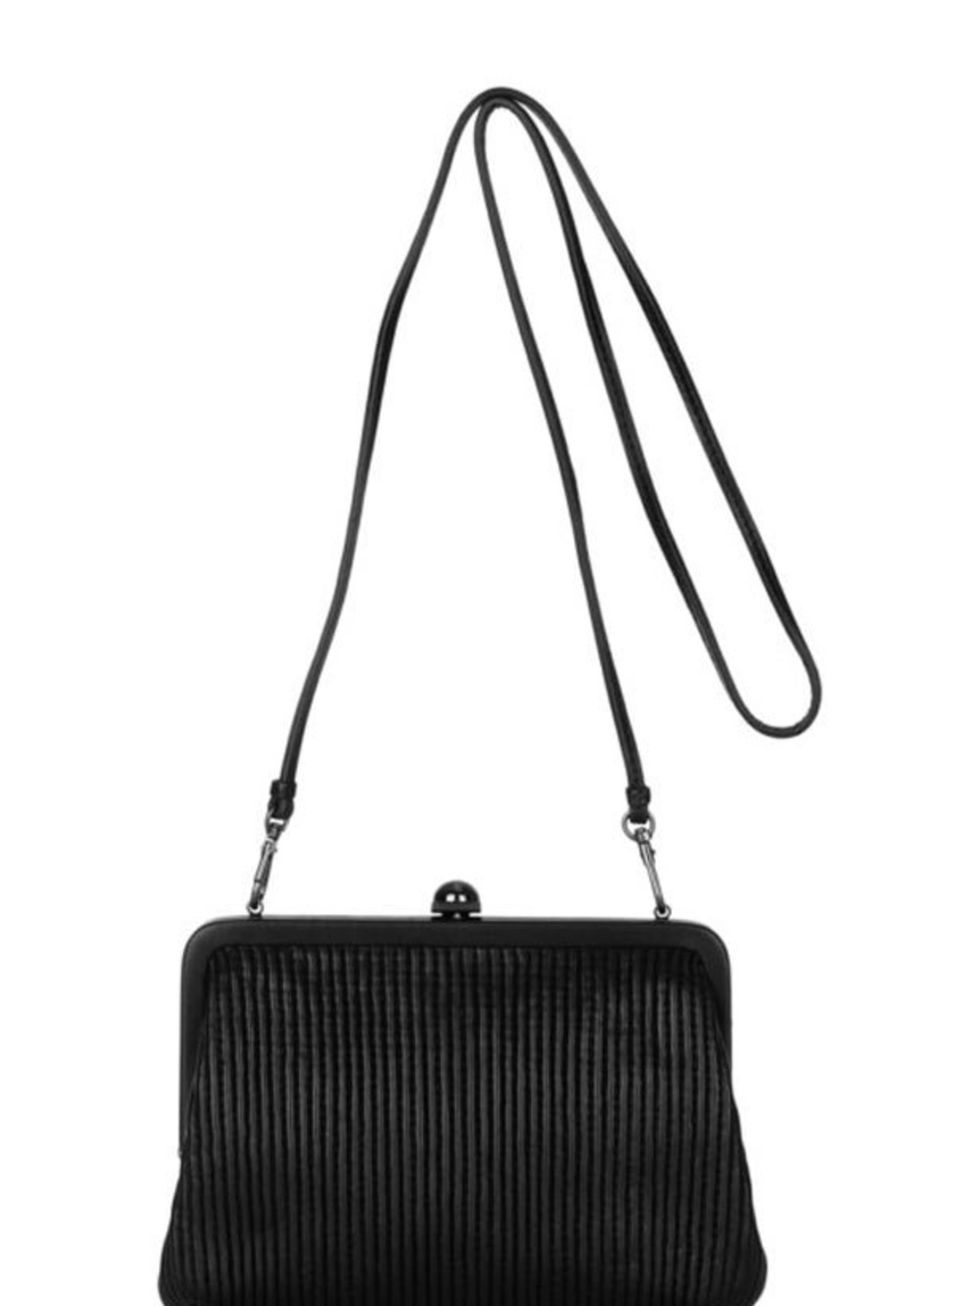 <p>Reed Krakoff ribbed leather bag, £340, at <a href="http://www.net-a-porter.com/product/162173">Net-a-Porter</a></p>